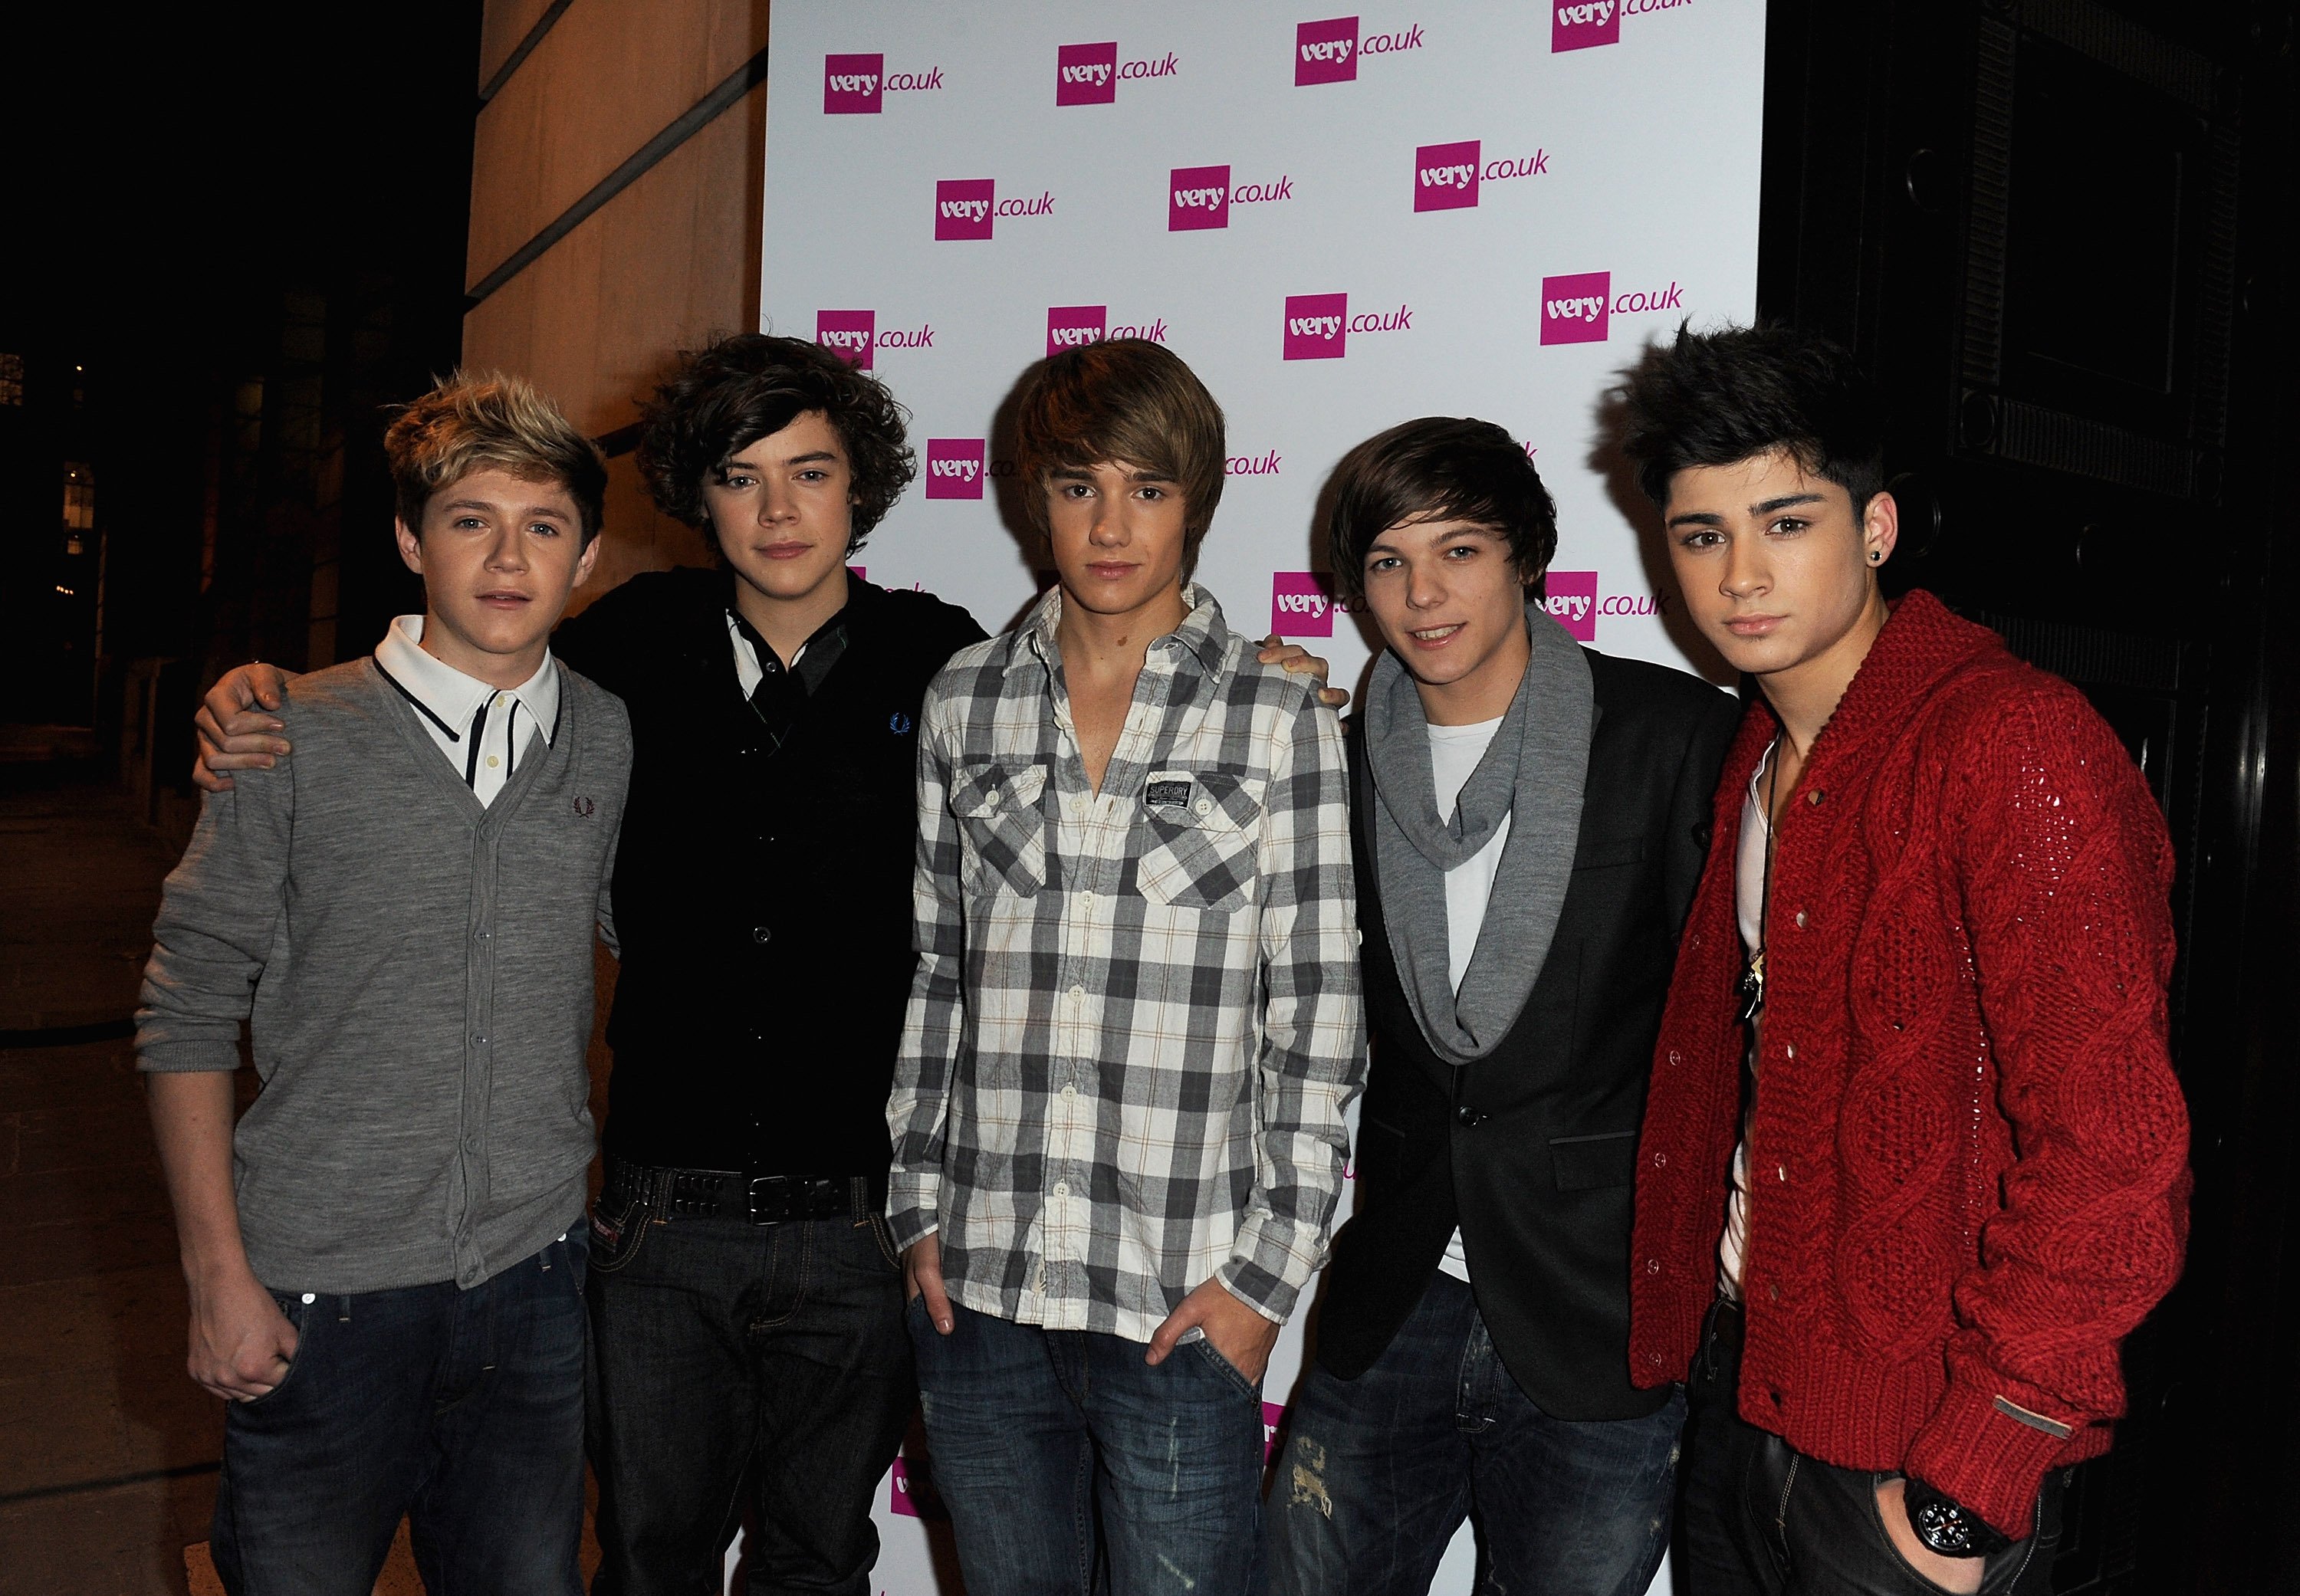 X-Factor finalists One Direction (L-R) Niall Horran, Harry Styles, Liam Payne, Louis Tomlinson and Zain Malik attend the Very.co.uk Christmas Catwalk Show held at Victoria House on November 24 in London, England